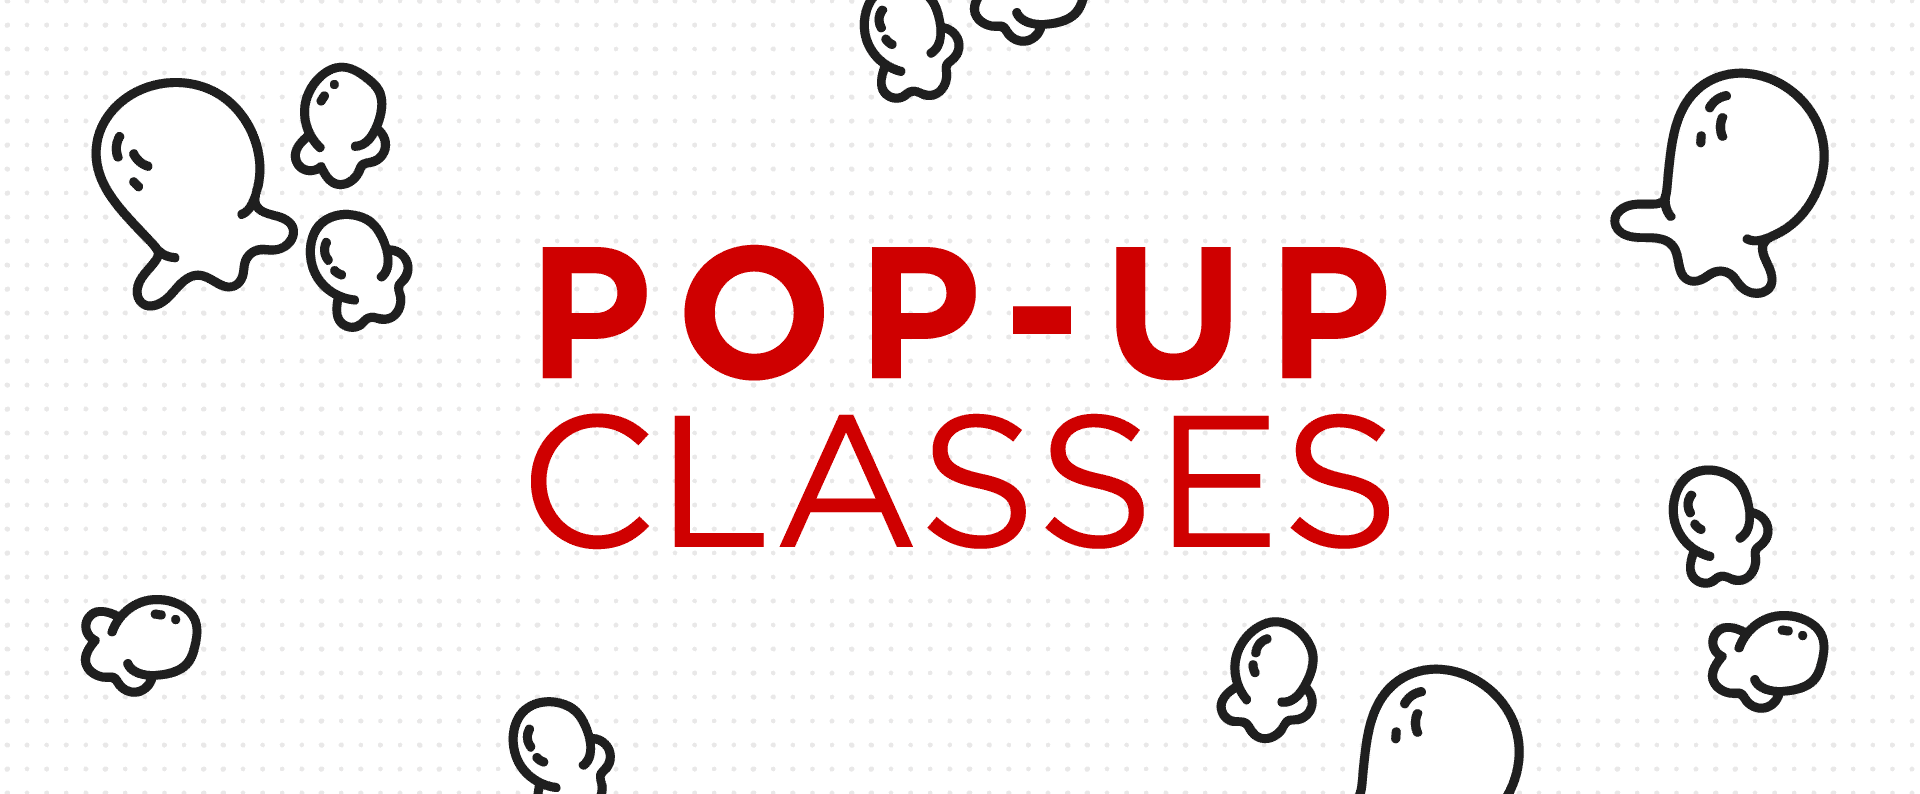 Pop-up classes are available now in MyRed!